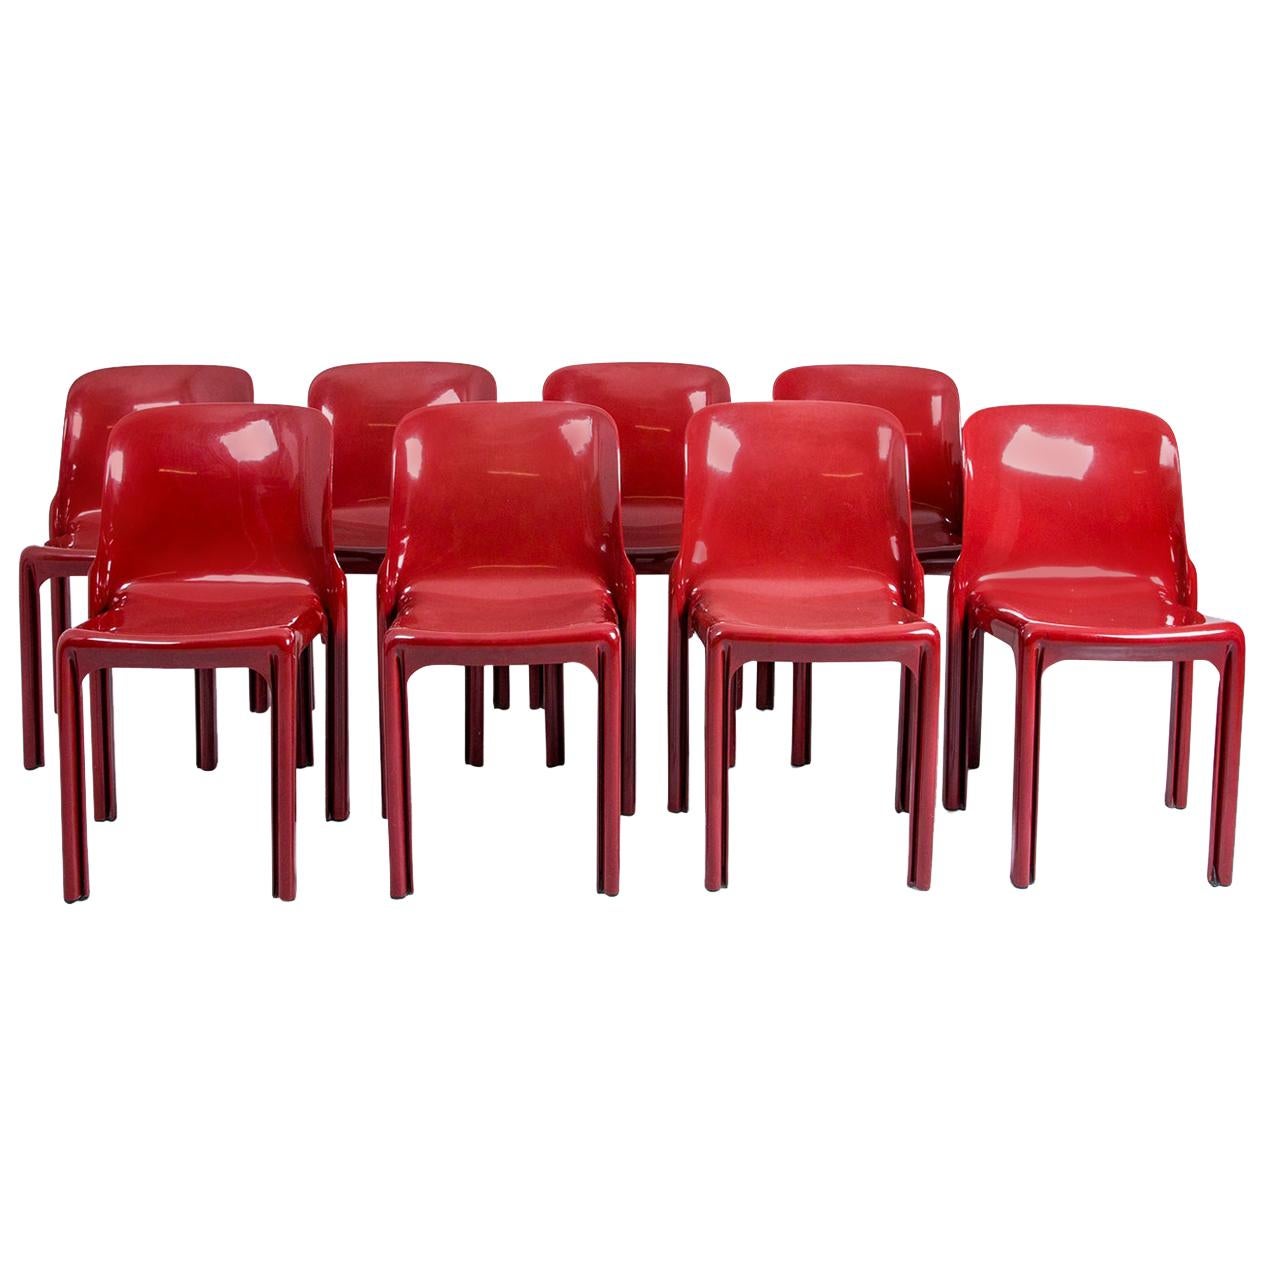 Selene Stacking Chairs by Vico Magistretti for Artemide in Dark Red